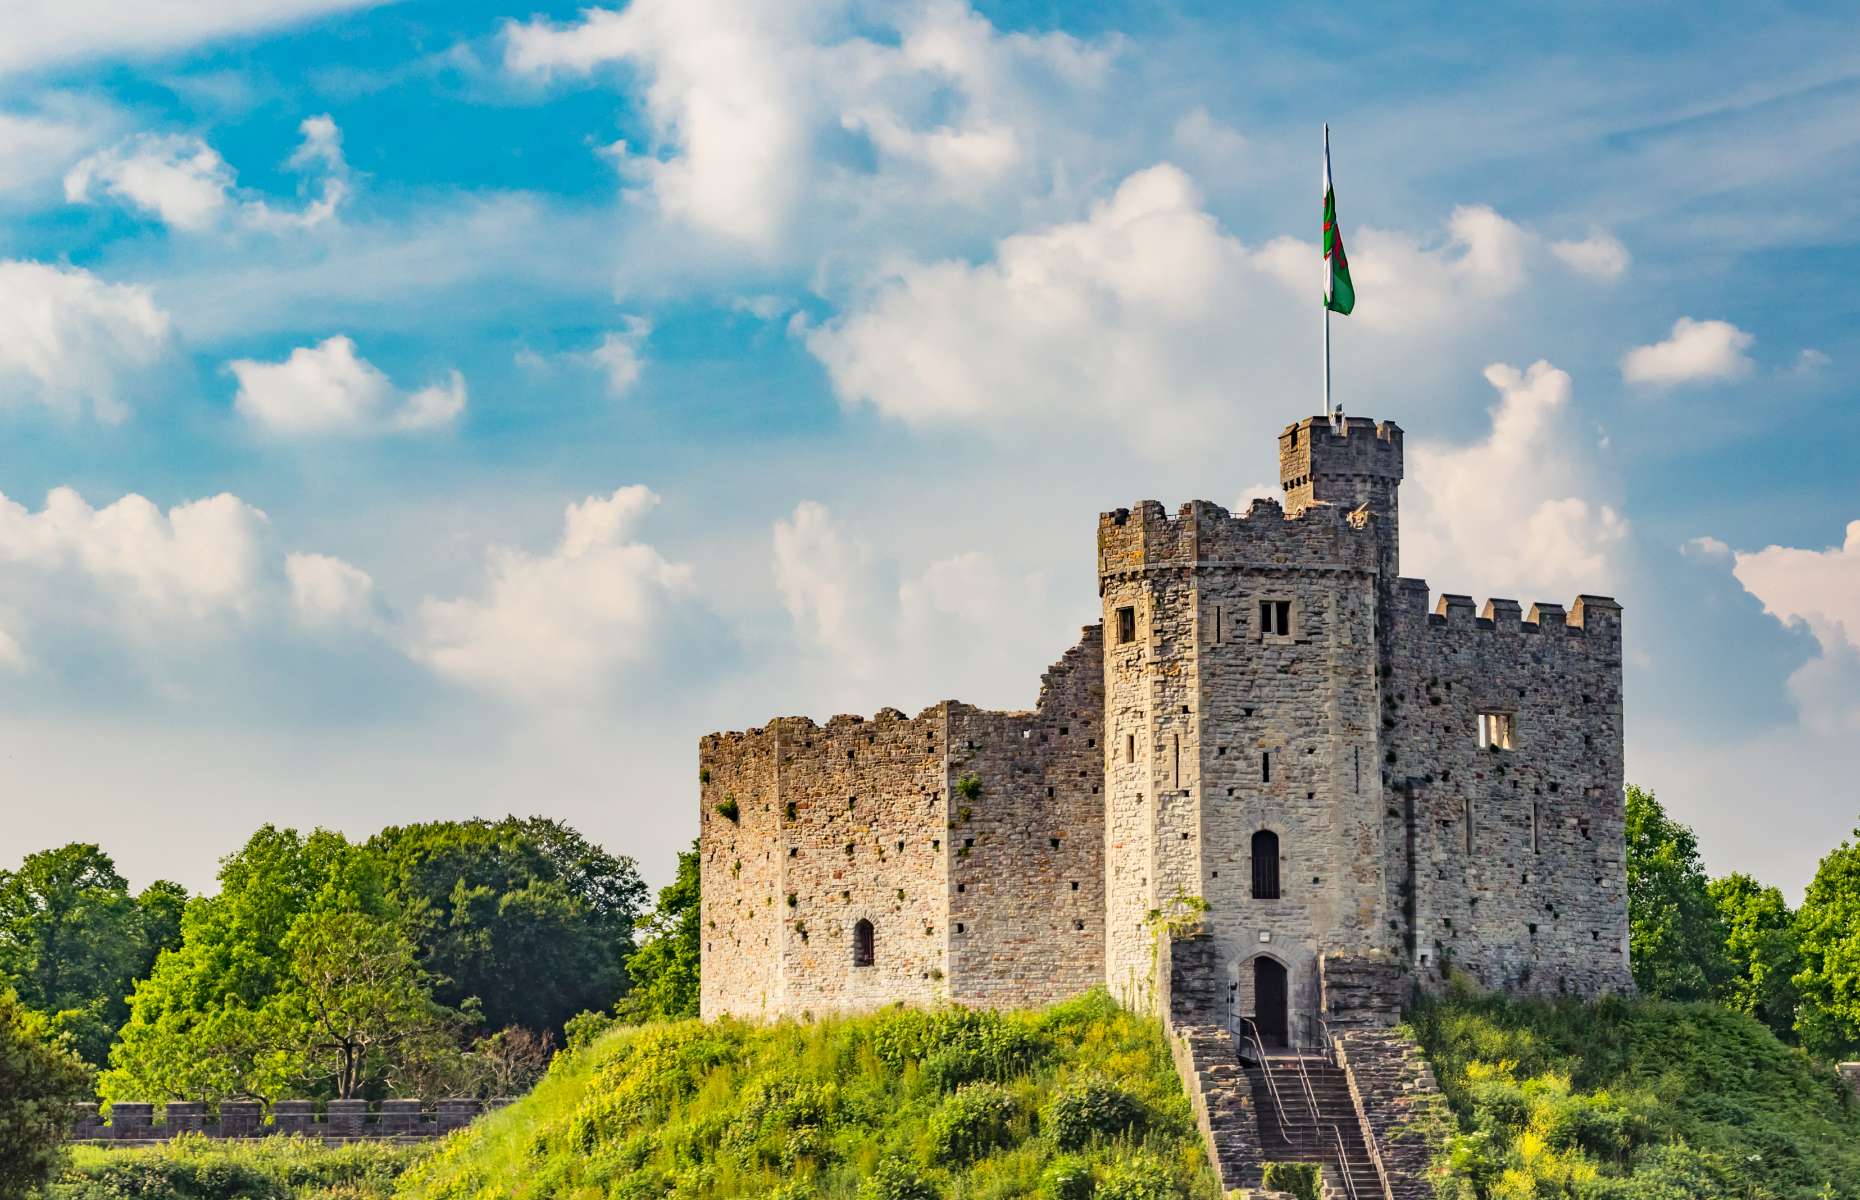 Image of Cardiff Castle (Image: CanonDLee/Shutterstock)